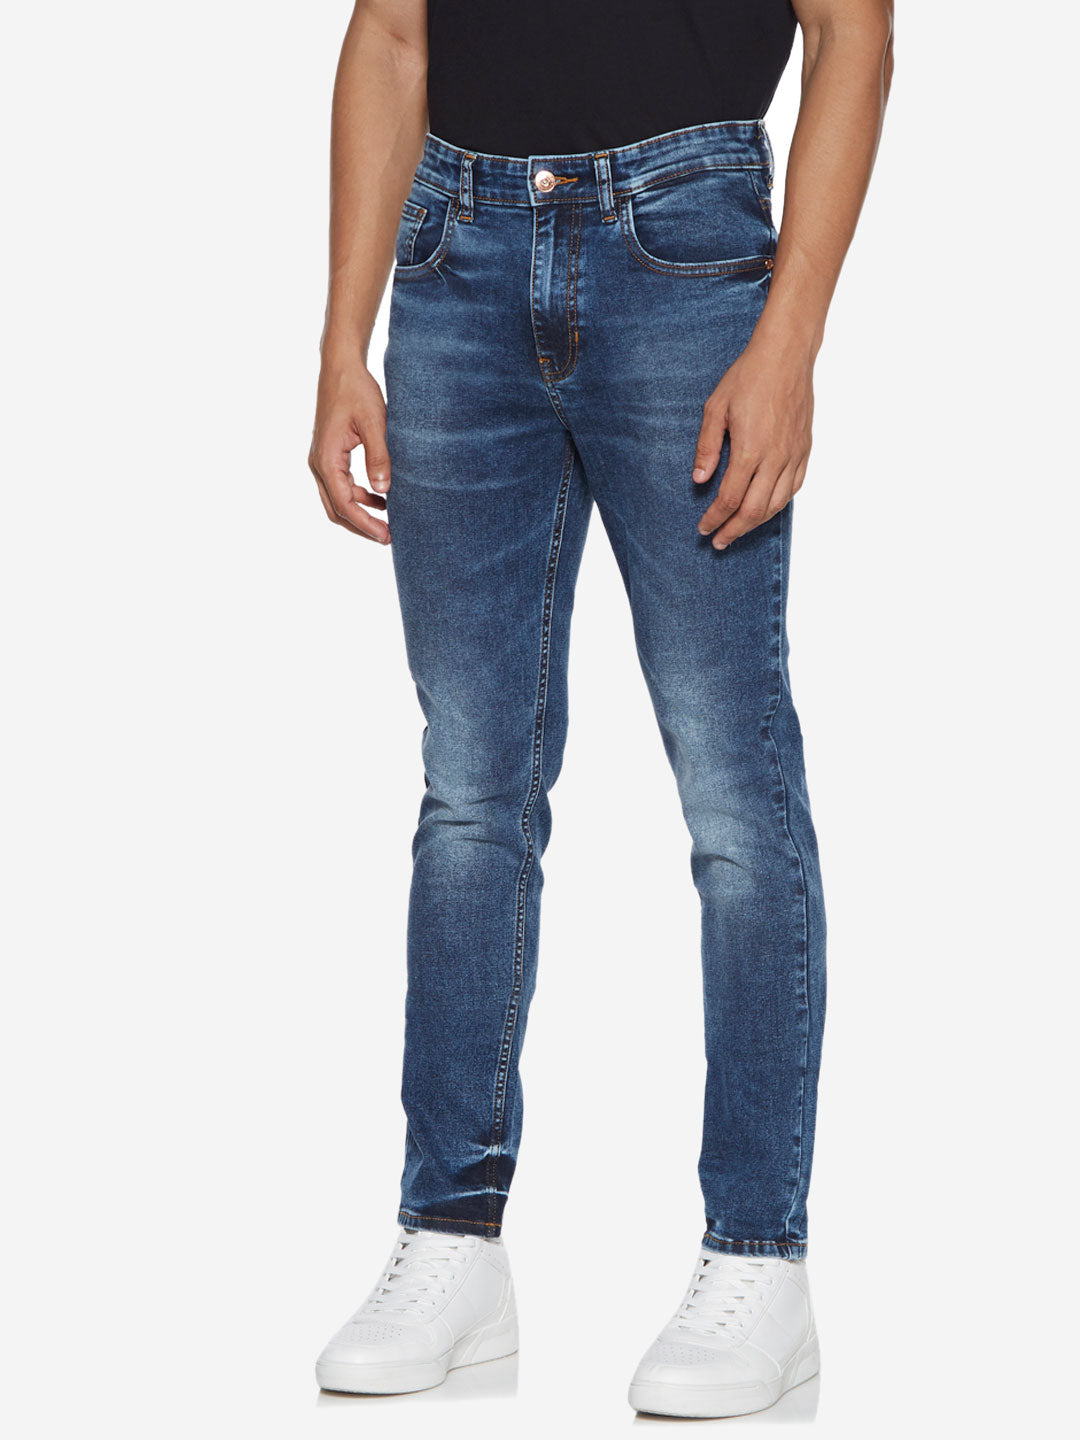 nuon jeans price